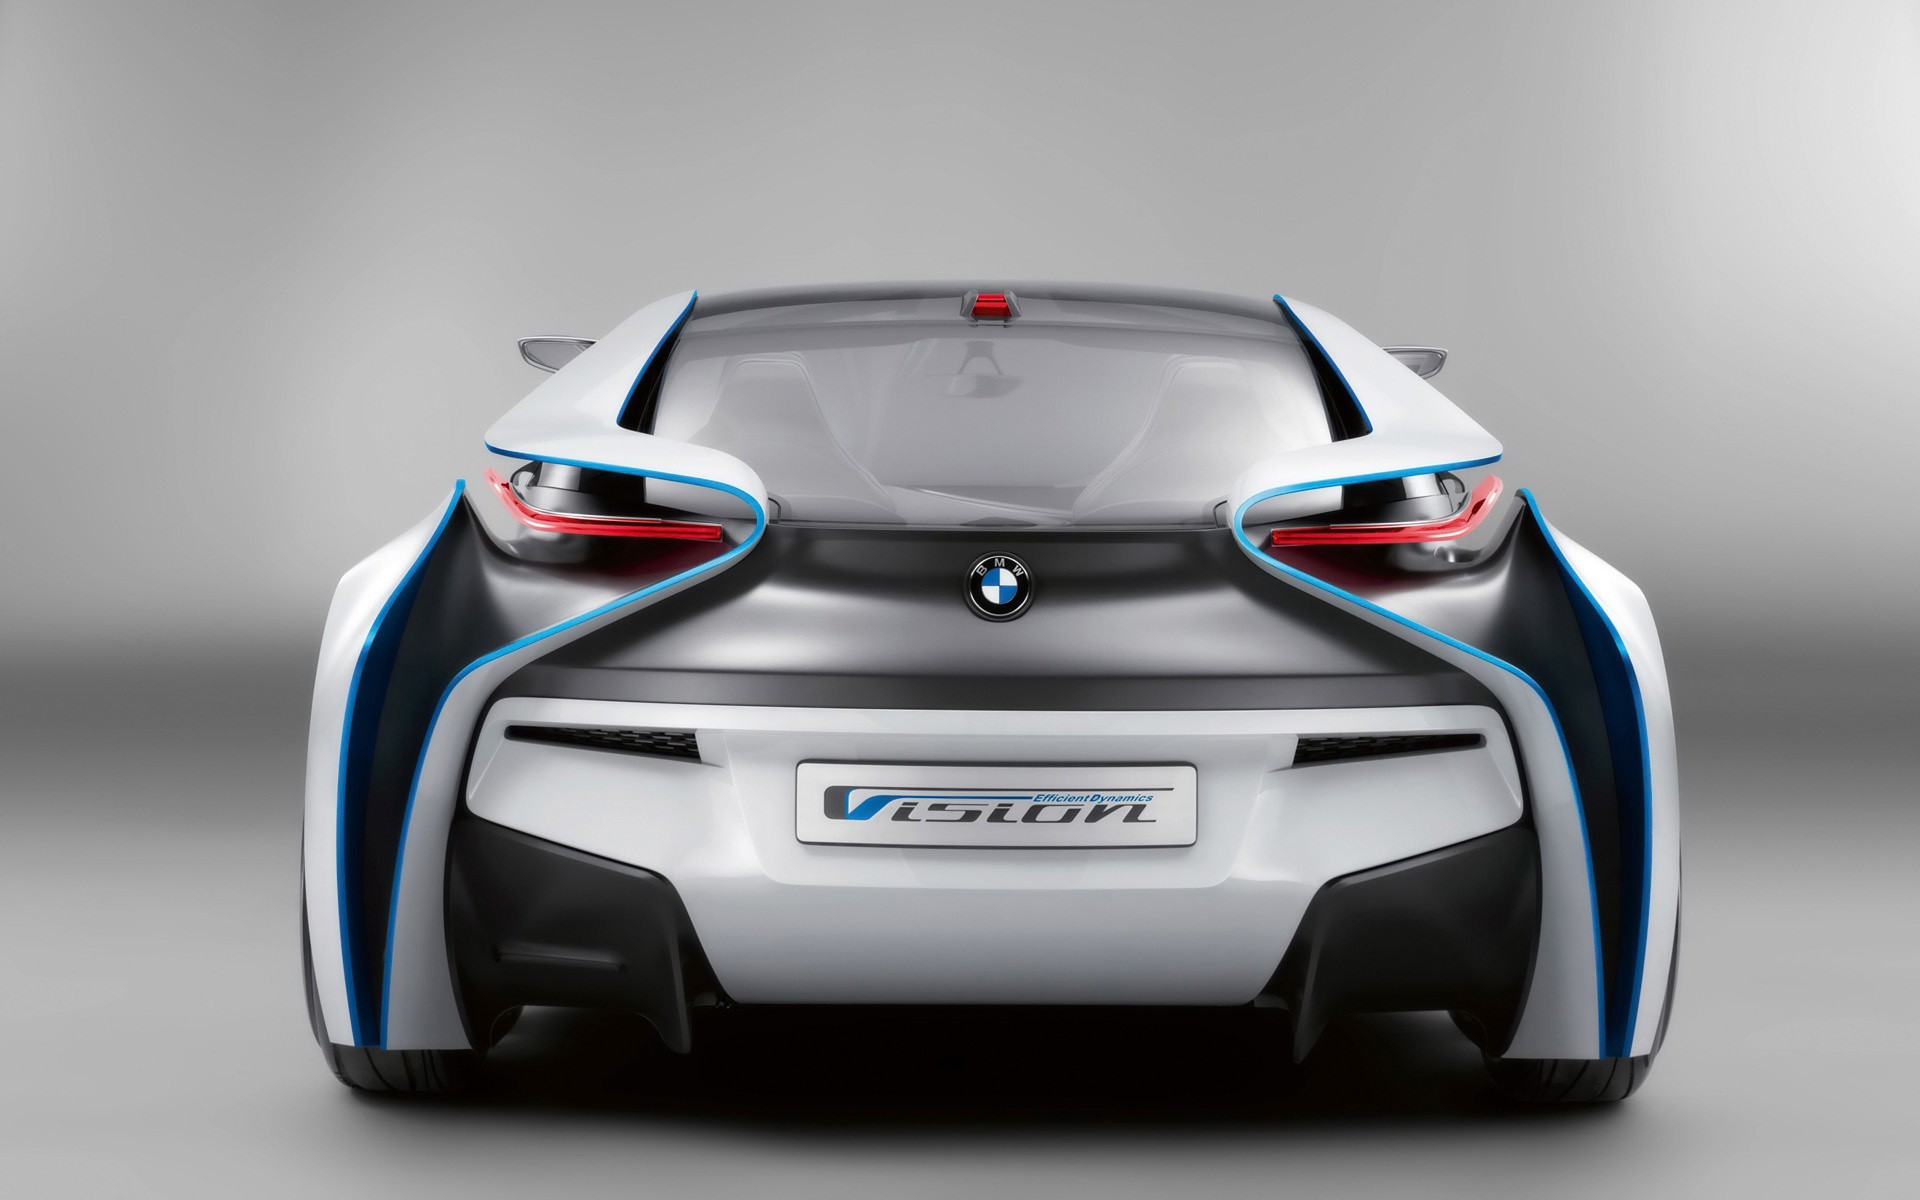 bmw, Cars, Prototypes, Vehicles, Supercars, Concept, Cars, Bmw, Vision Wallpaper